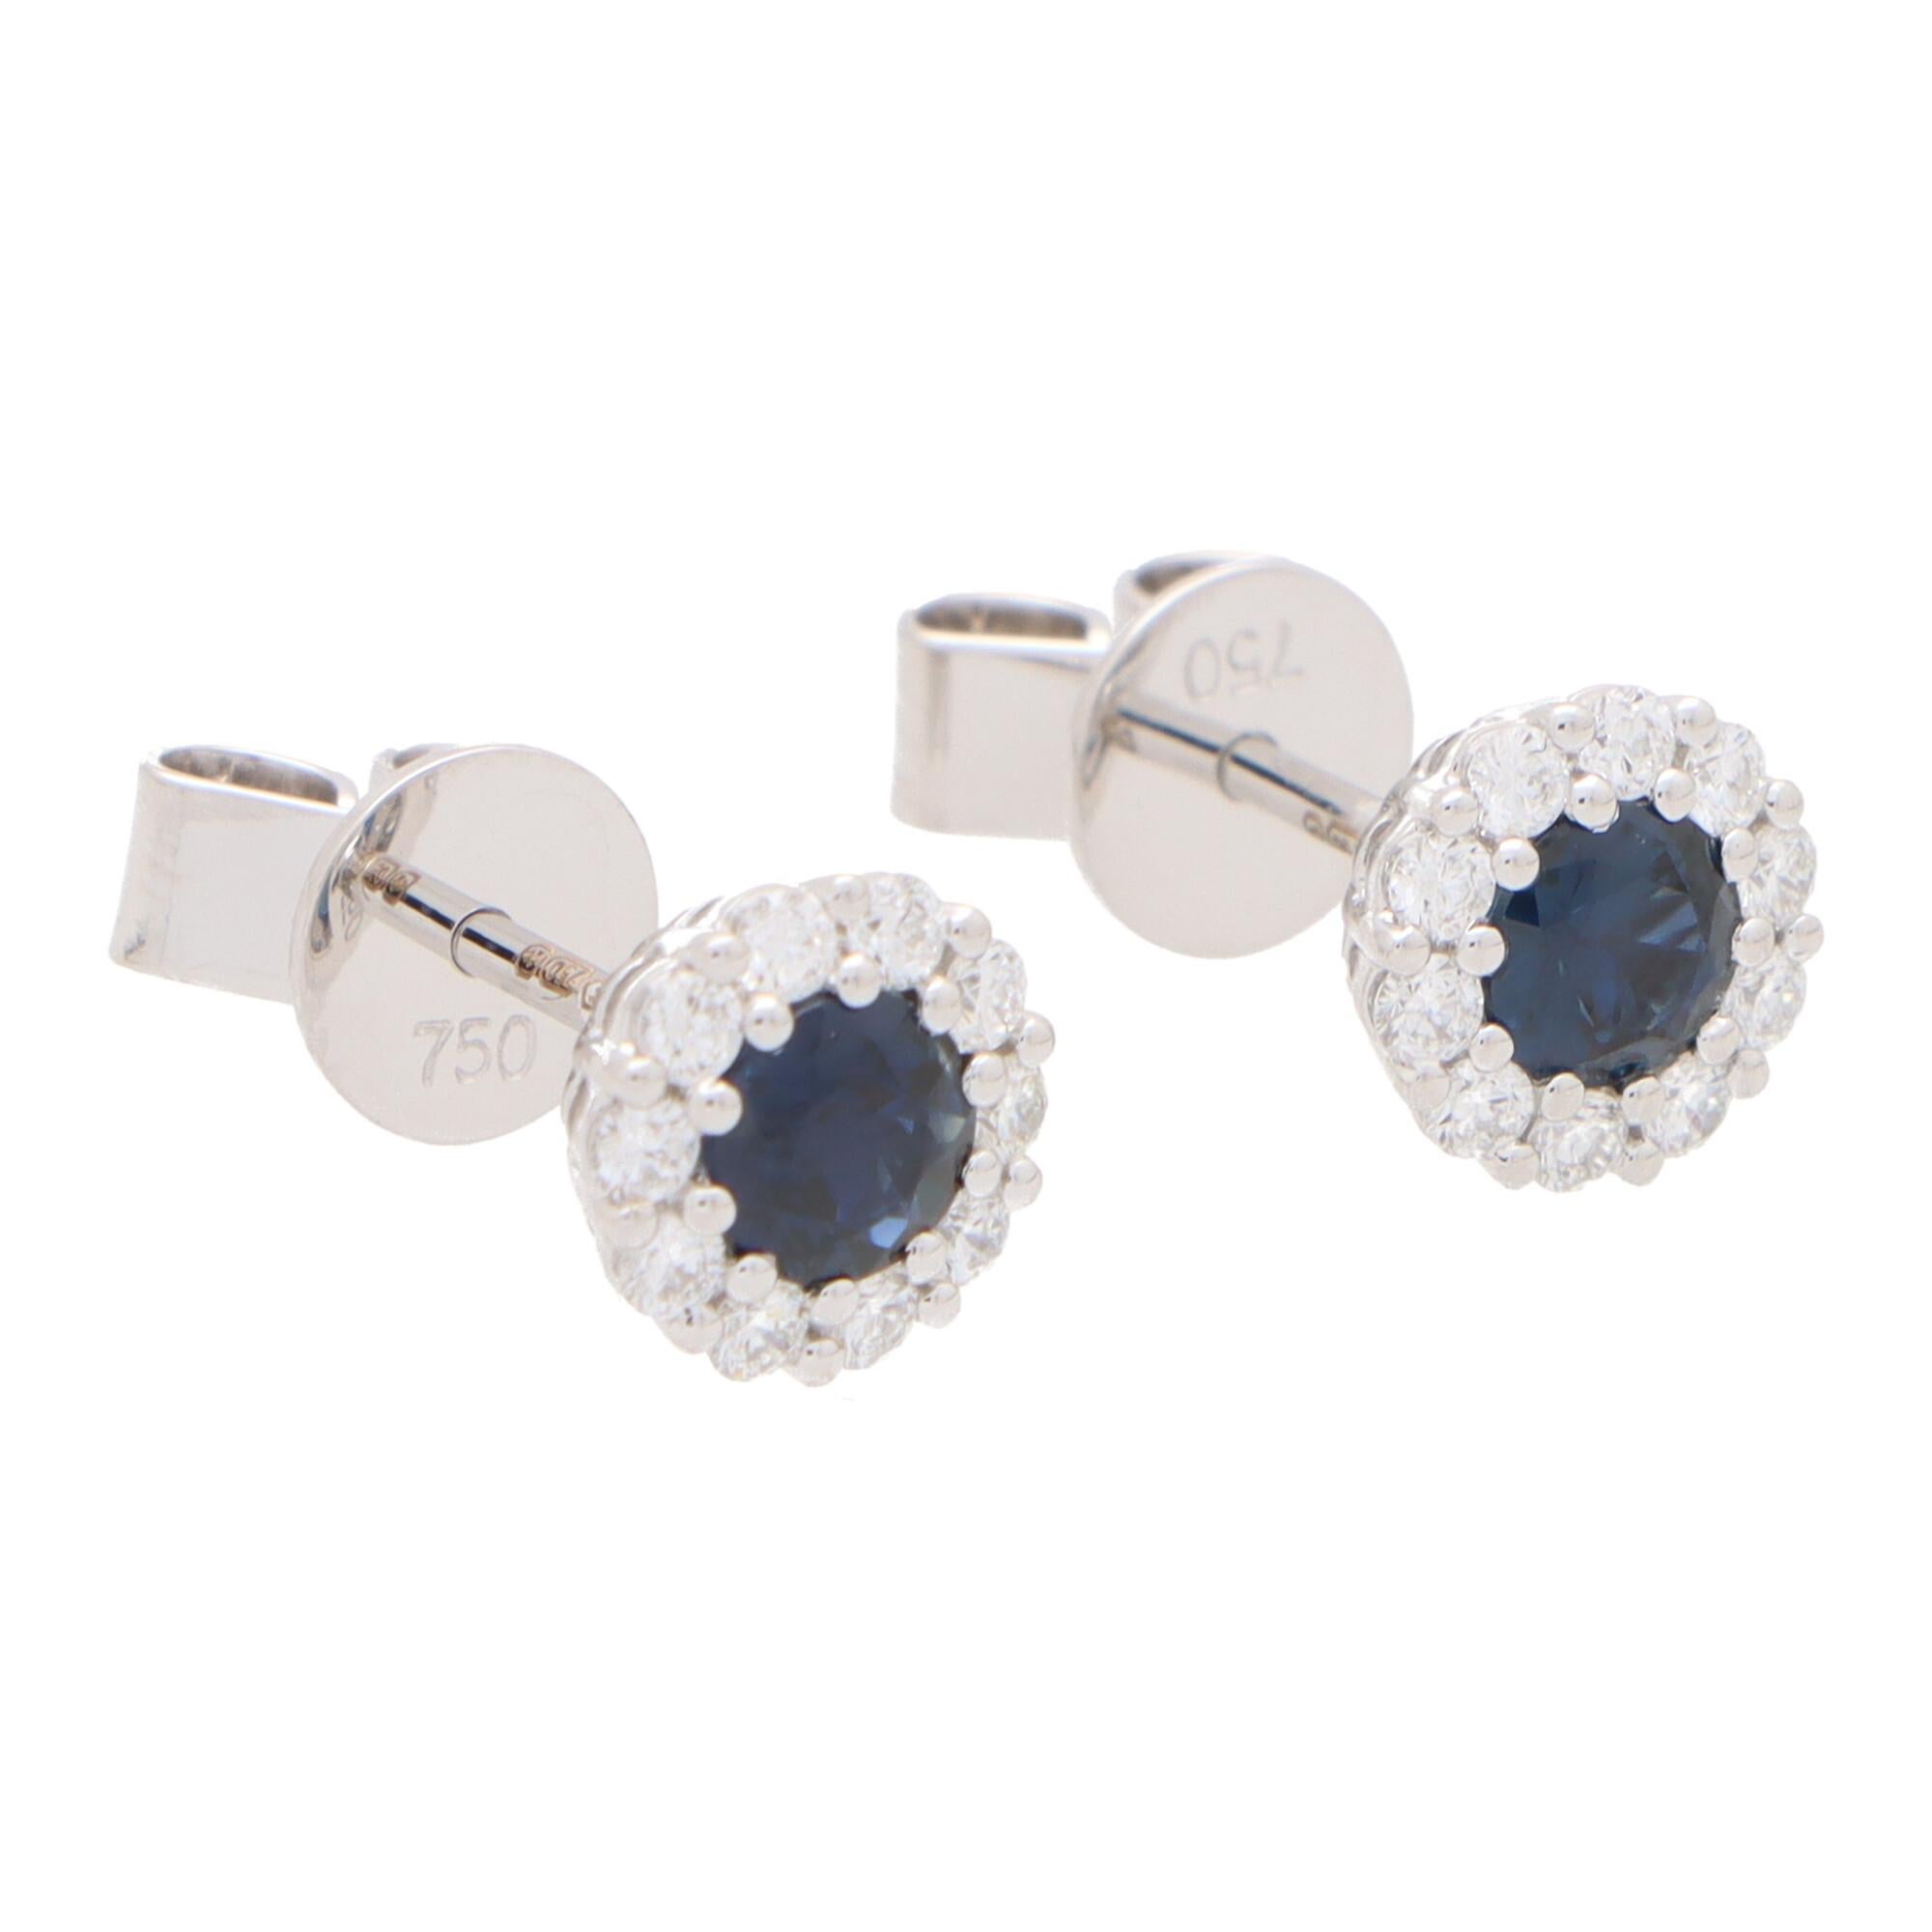 A beautiful pair of sapphire and diamond circular cluster earrings set in 18k white gold.

Each earring centrally features a beautiful royal blue coloured round cut sapphire surrounded by a halo of 10 round brilliant-cut diamonds. All of the stones